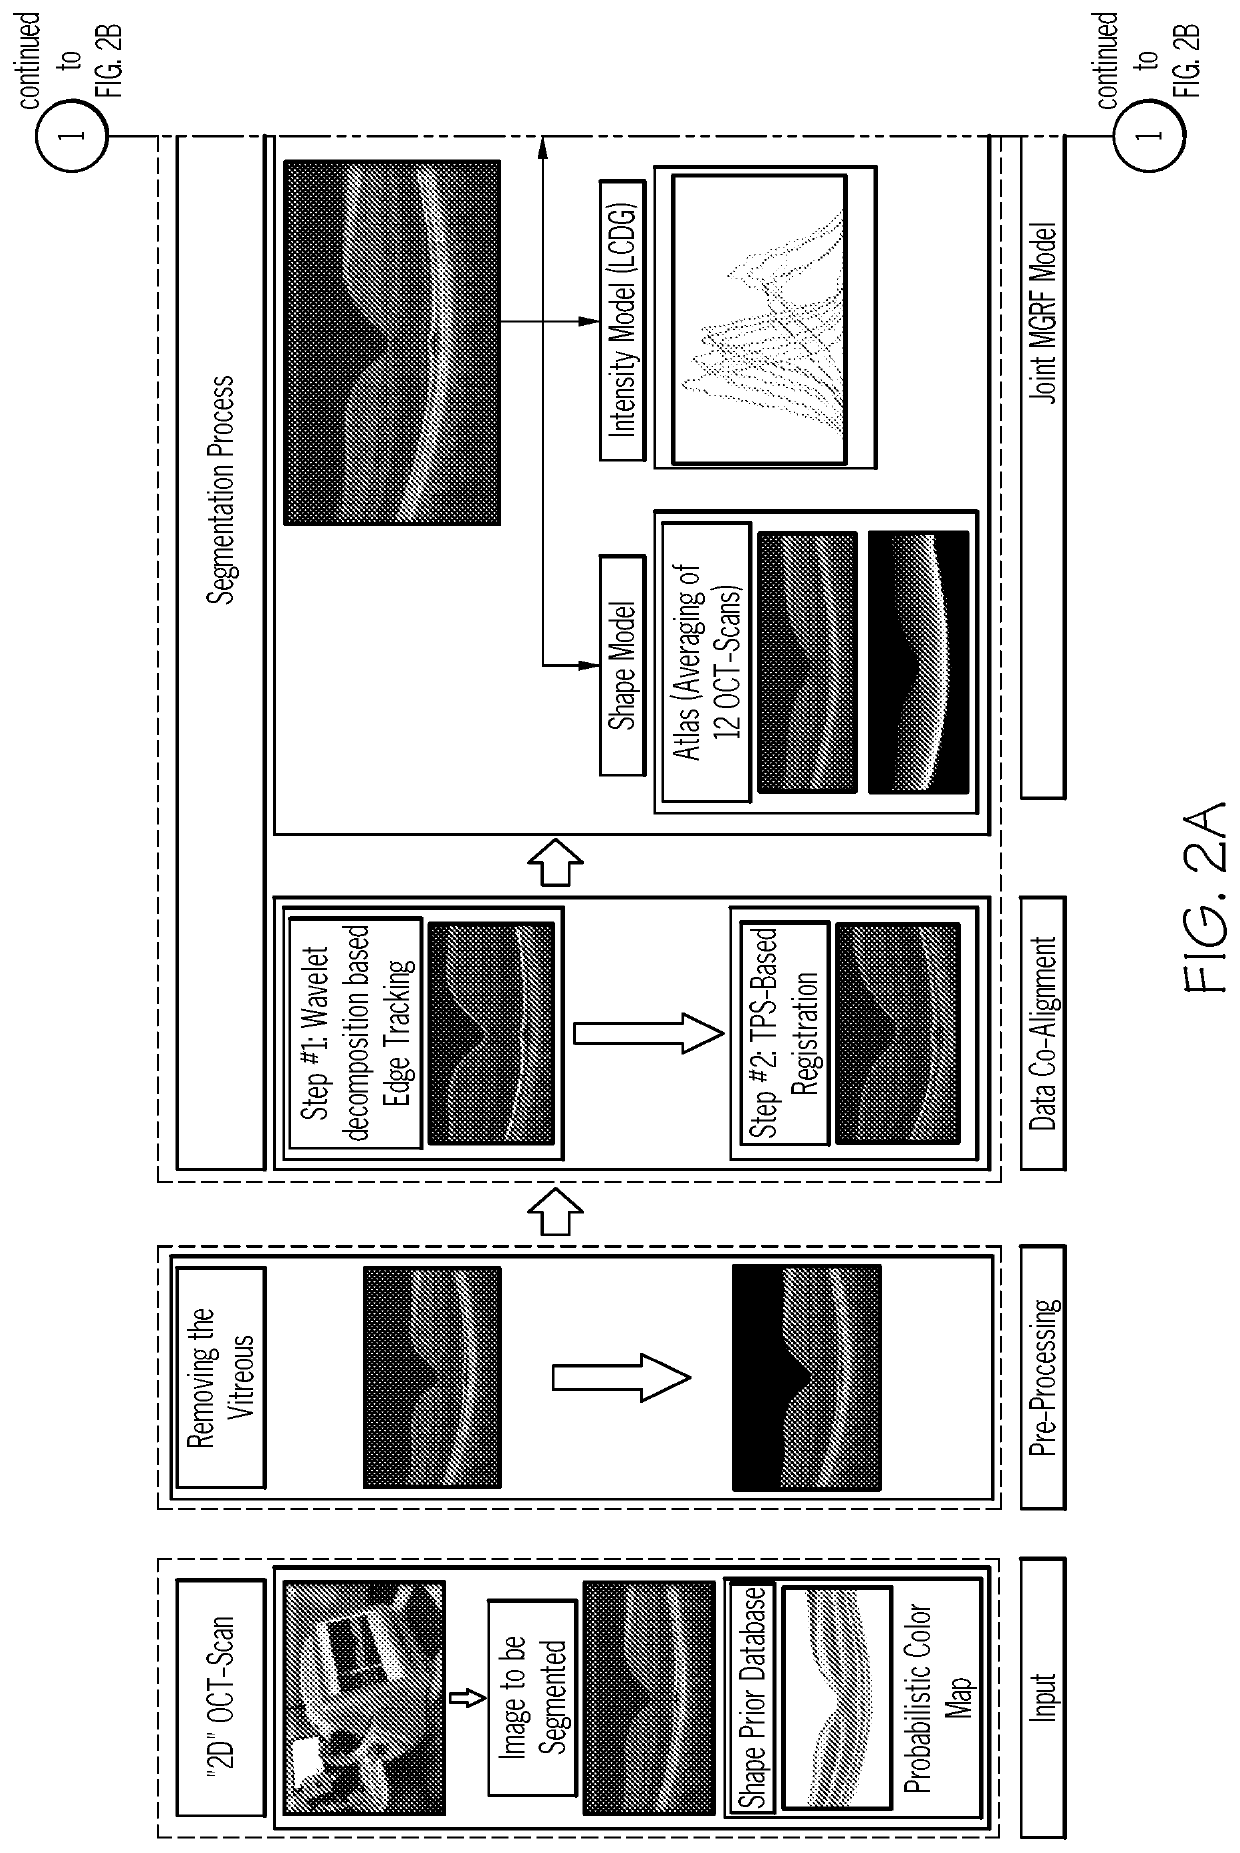 Automated methods for the objective quantification of retinal characteristics by retinal region and diagnosis of retinal pathology